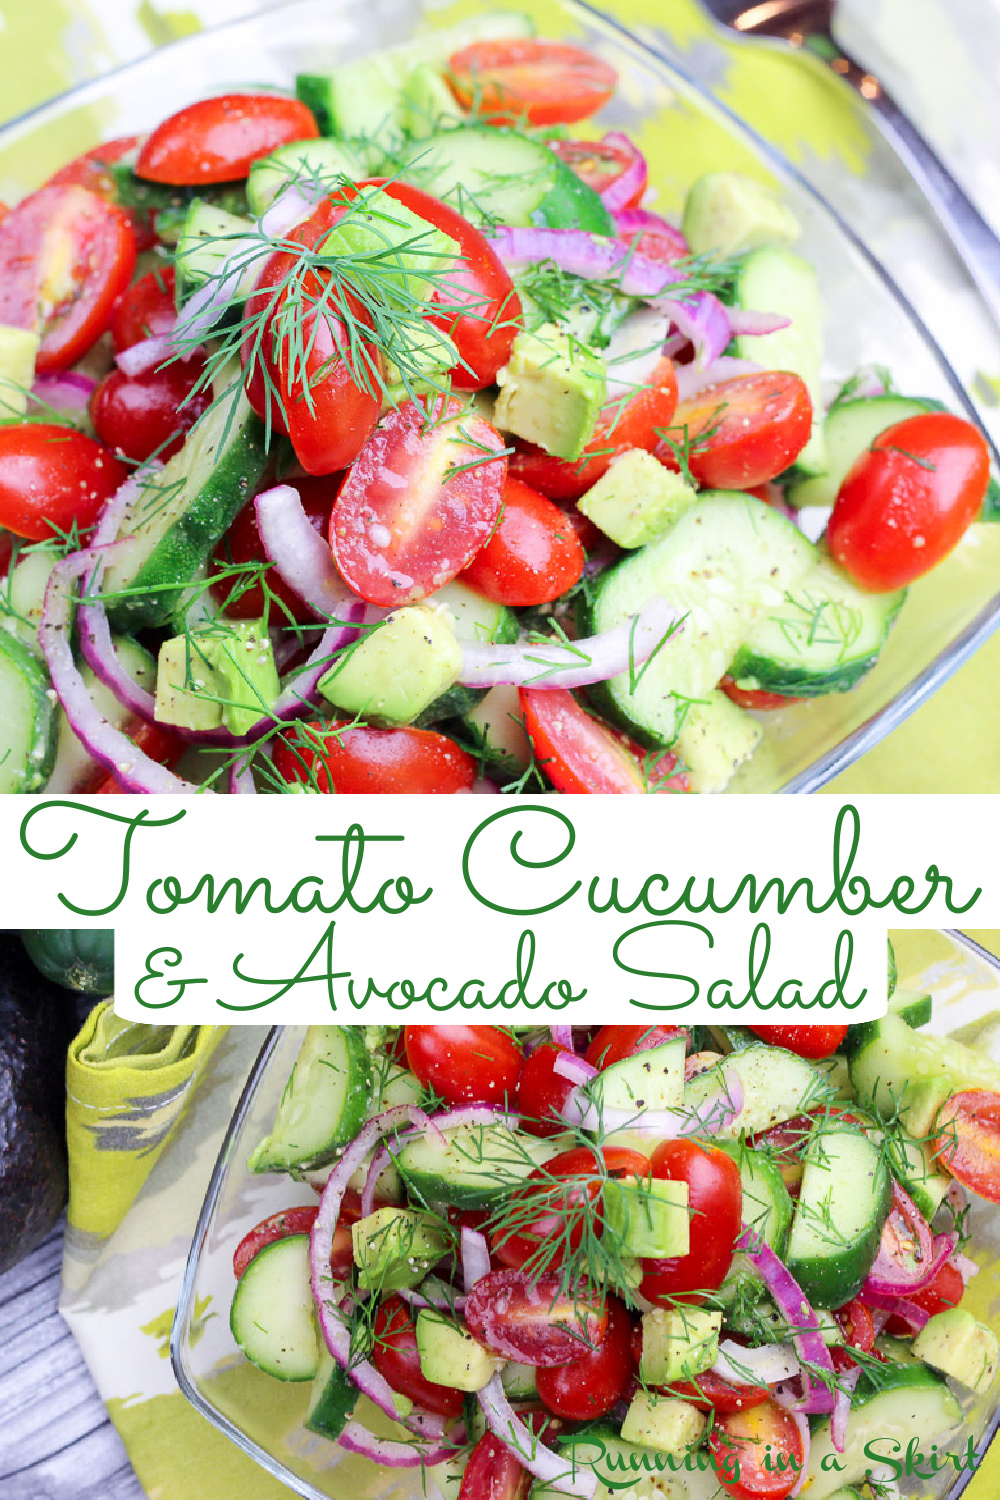 The Best Healthy & Vegan Tomato Cucumber and Avocado Salad recipe. This simple tomato cucumber salad is easy and uses dill, olive oils and rice wine vinegar for the dressing. Low carb, whole 30, 21 day fix, gluten free, dairy free, vegan, paleo, vegetarian & clean eating. / Running in a Skirt via @juliewunder